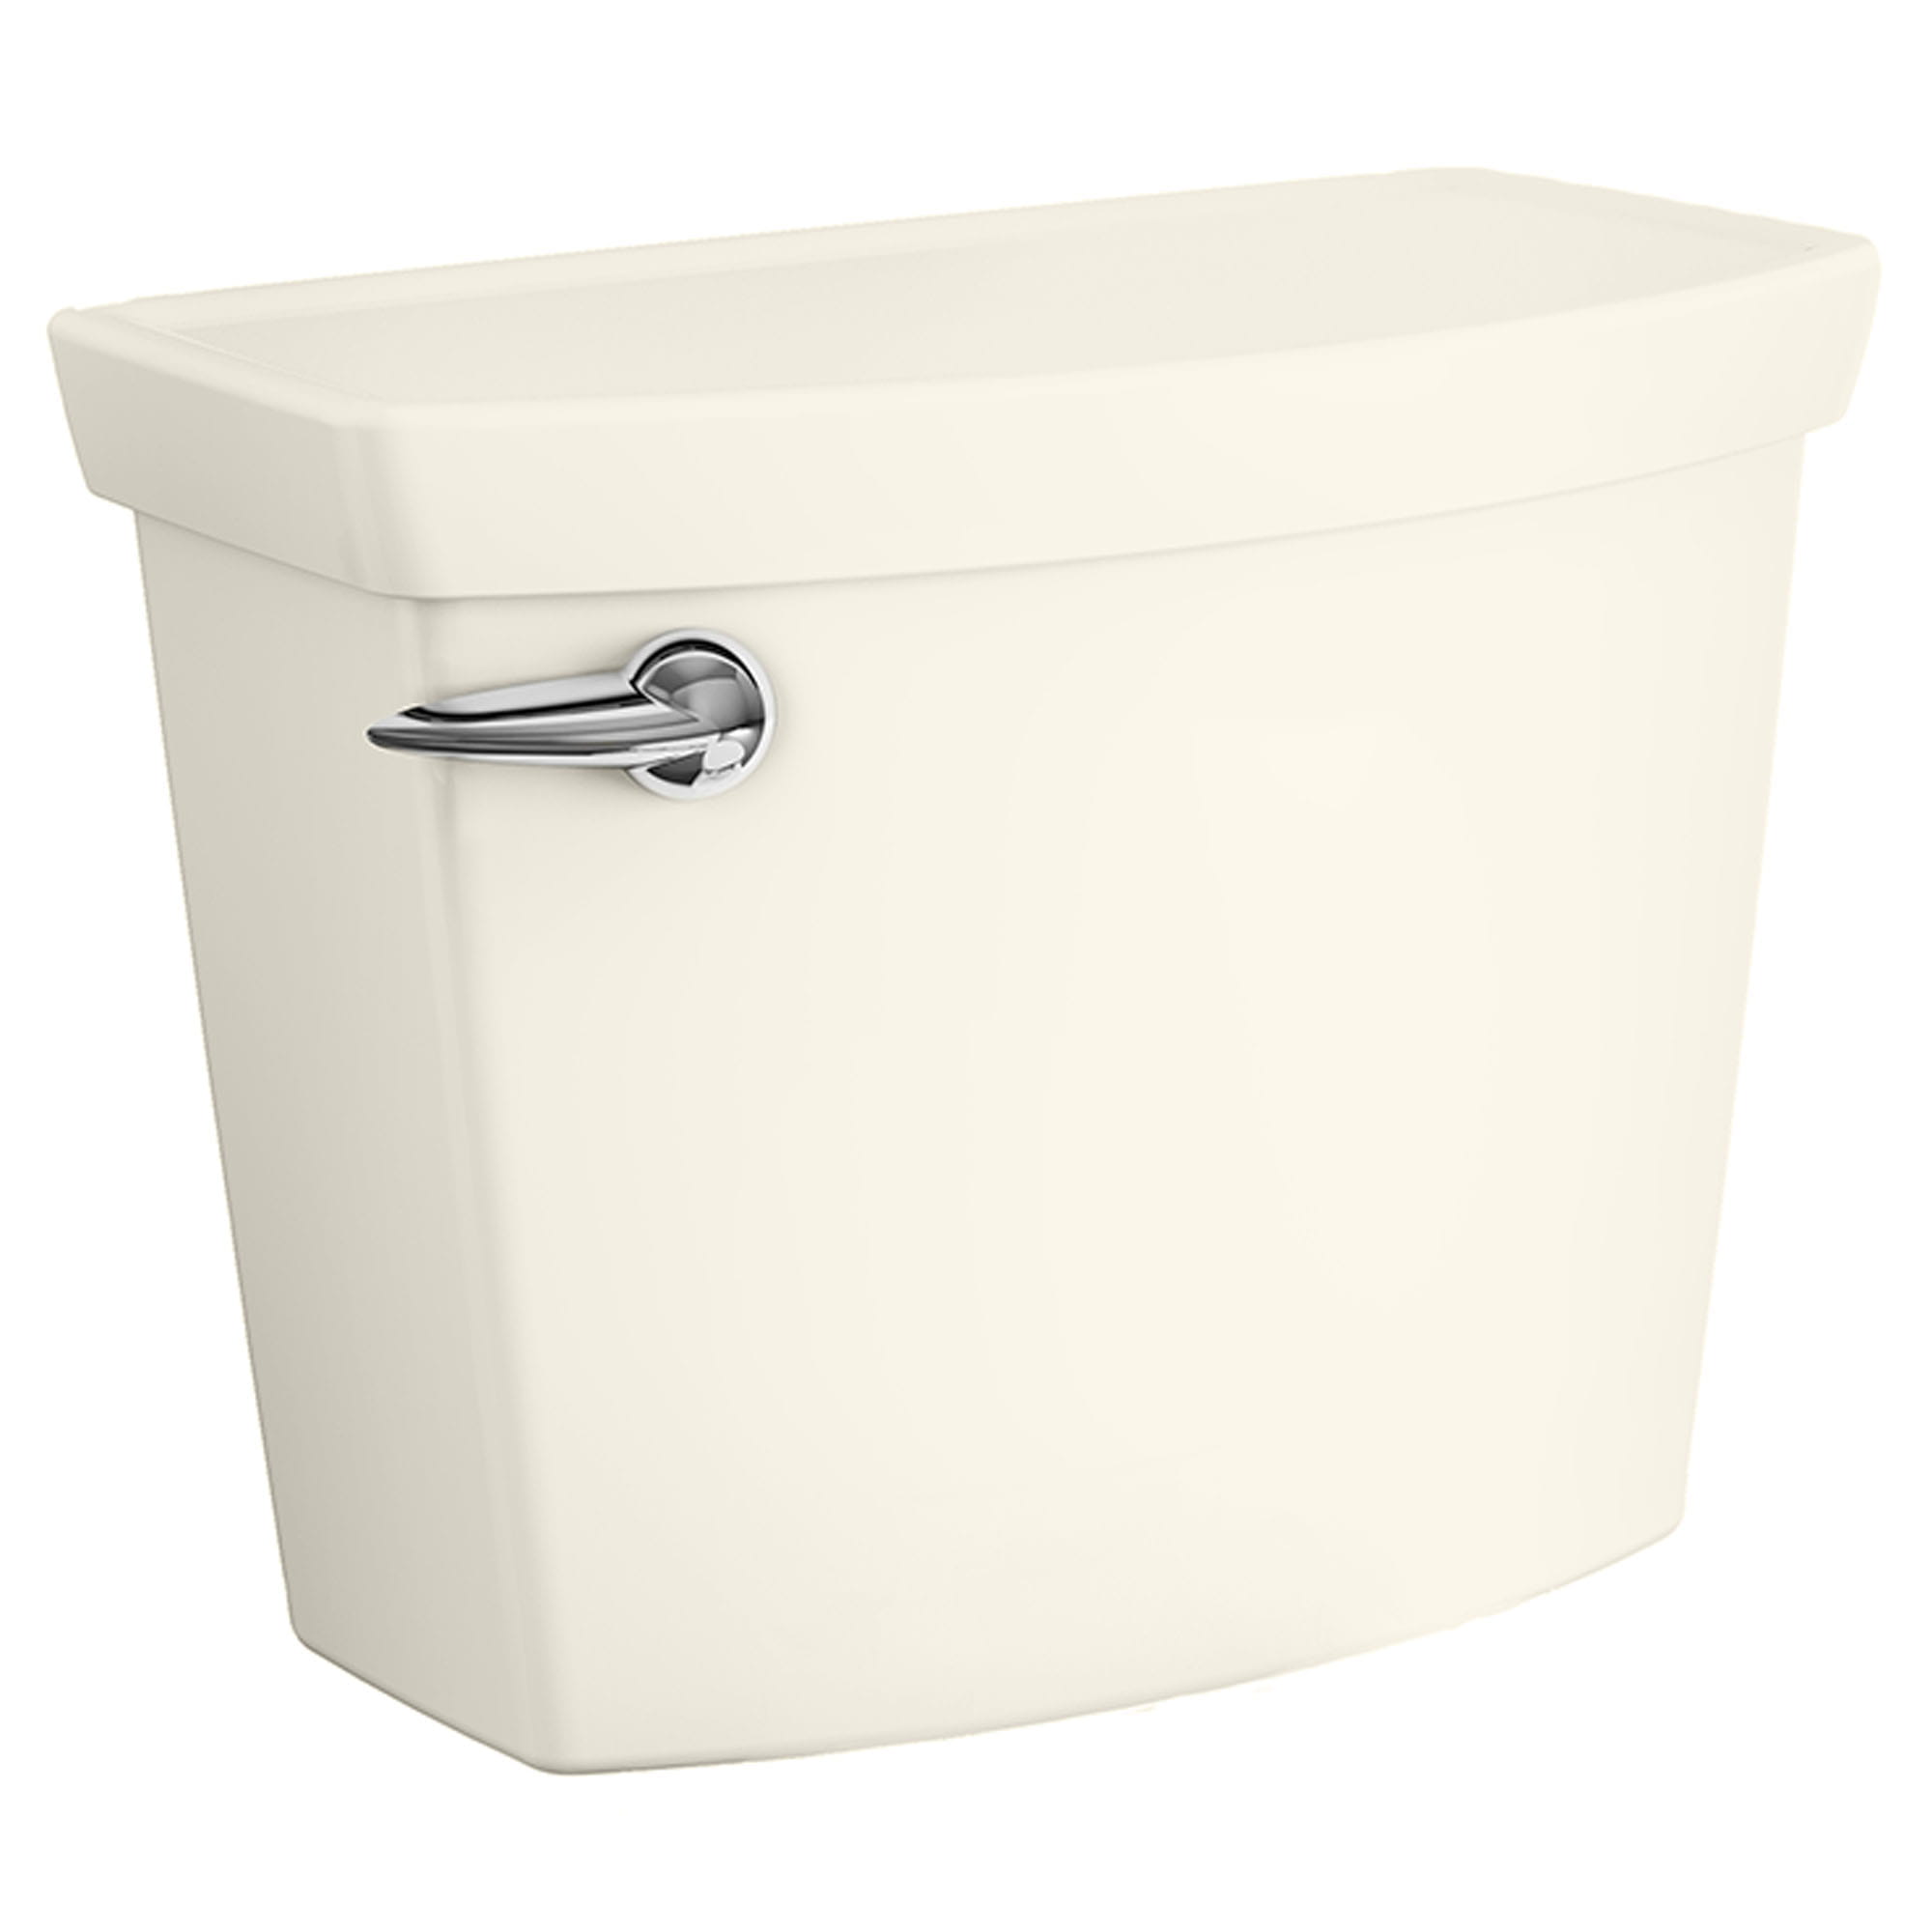 Champion 4 Max 1.28 GPF Toilet Tank and Lid by American Standard